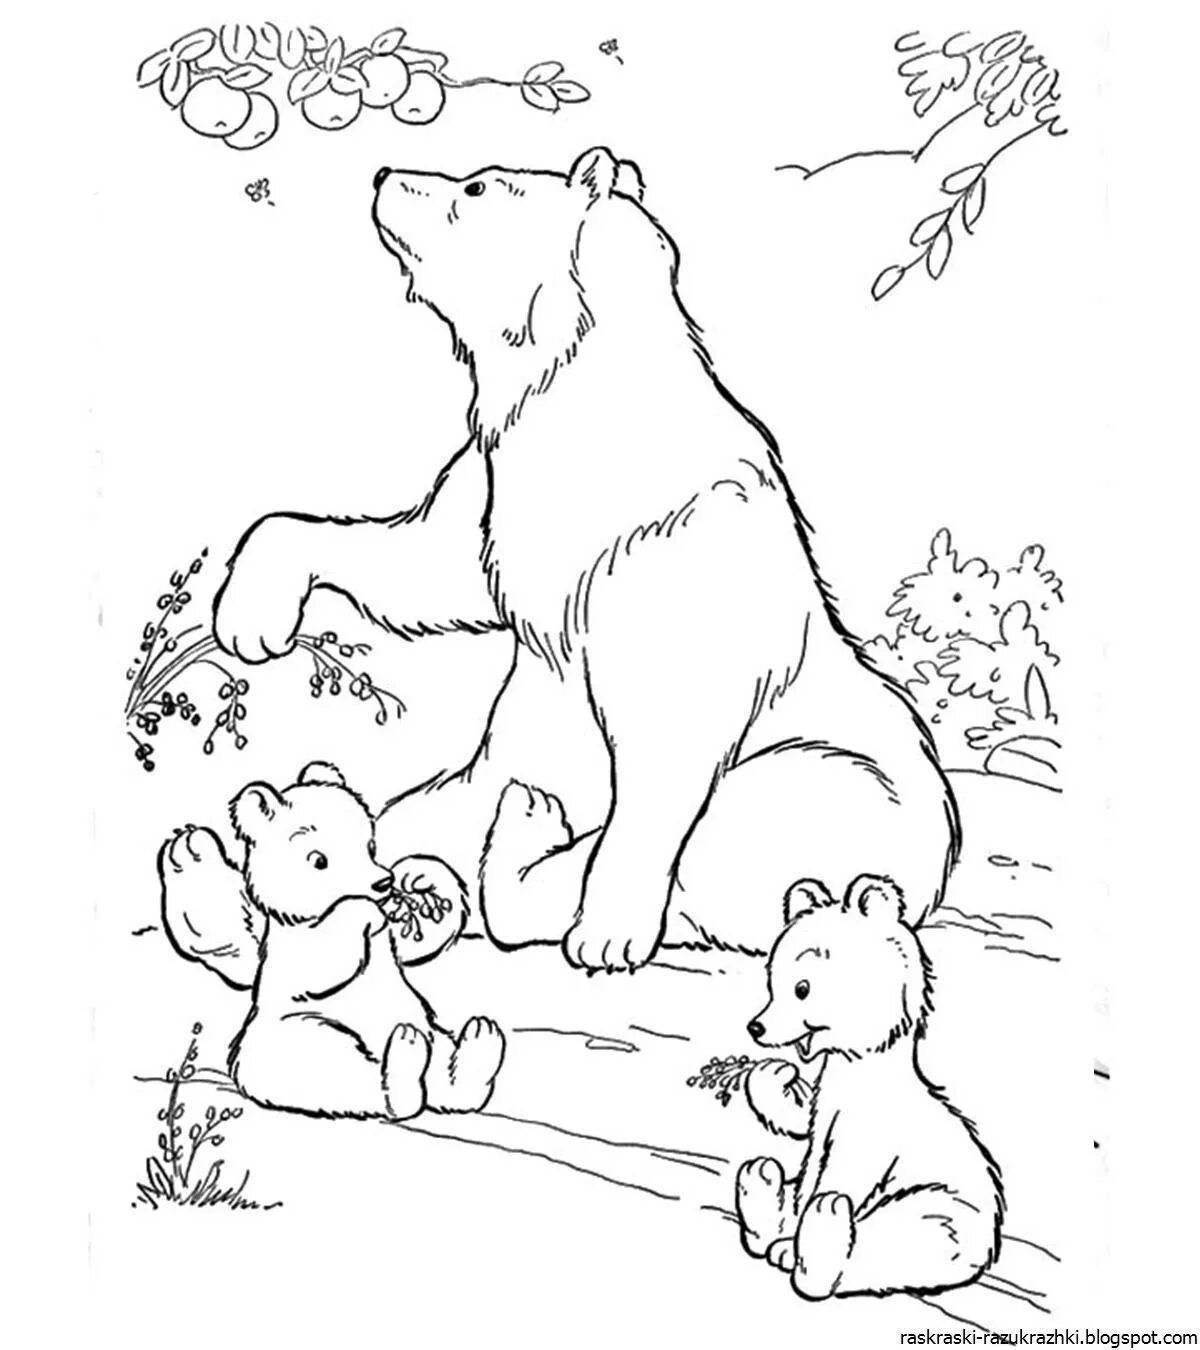 Charming teddy bear with cubs coloring book